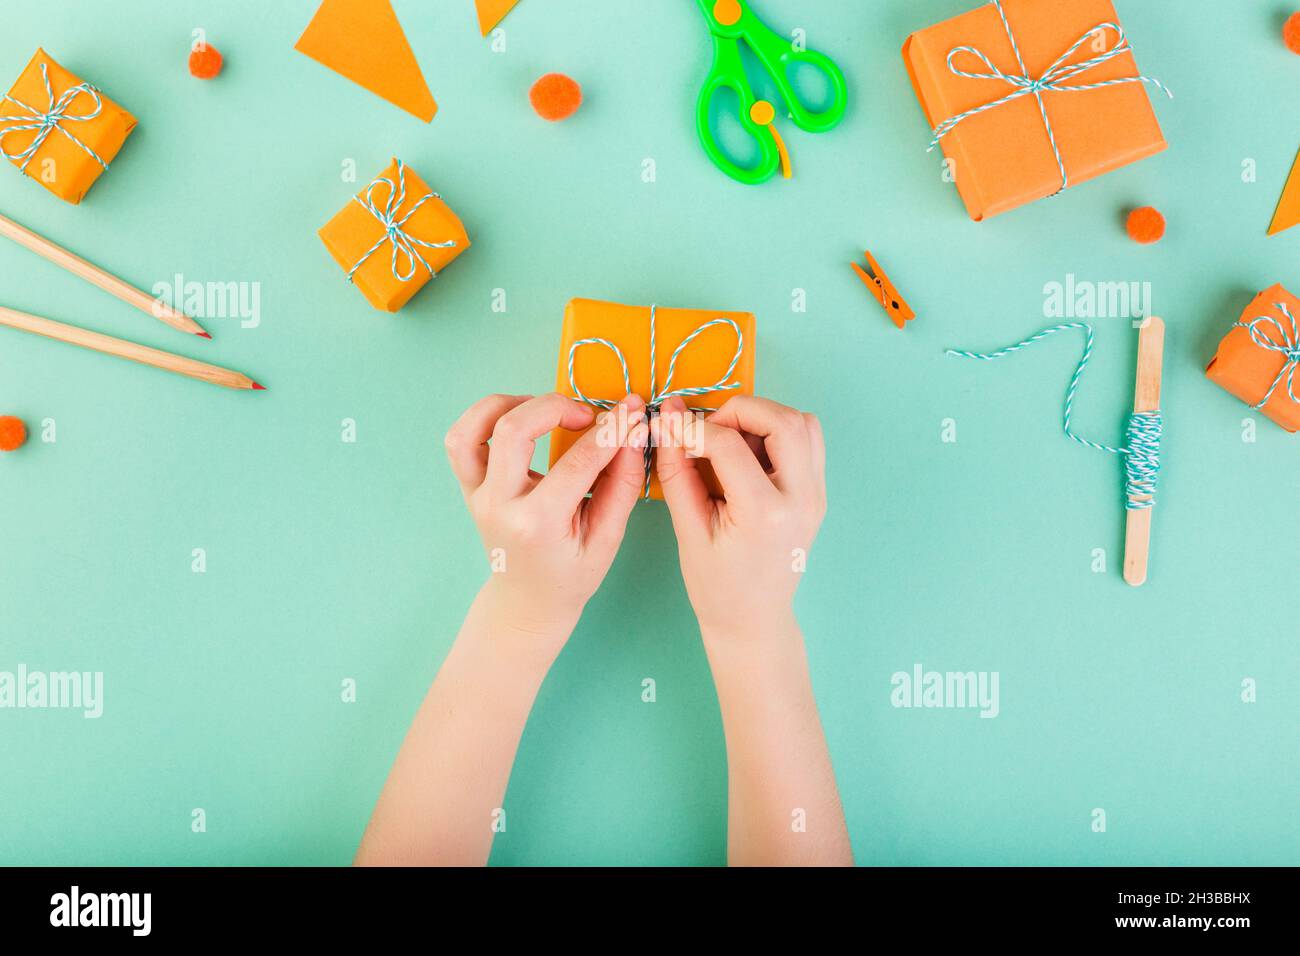 Child is whapping gift in orange paper on blue table top view. Season gift-giving concept. Made with his own hands. Stock Photo